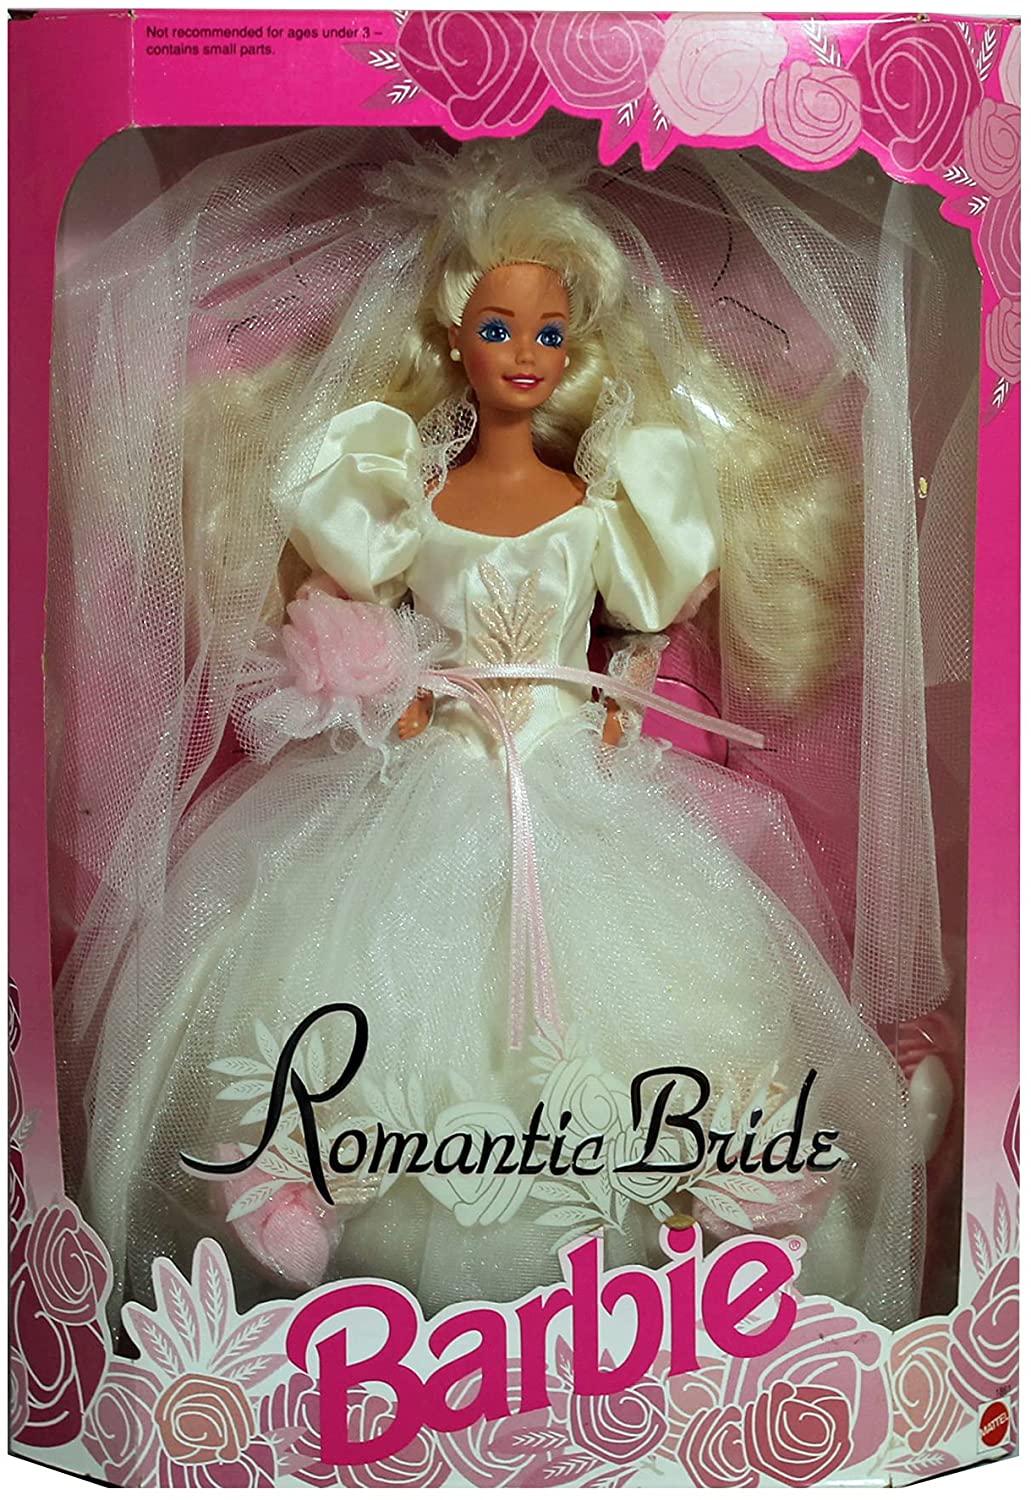 Mattel Barbie Romantic Bride Doll BobaKhan Toys - Vintage and New Action Figures, Toys Collectibles!